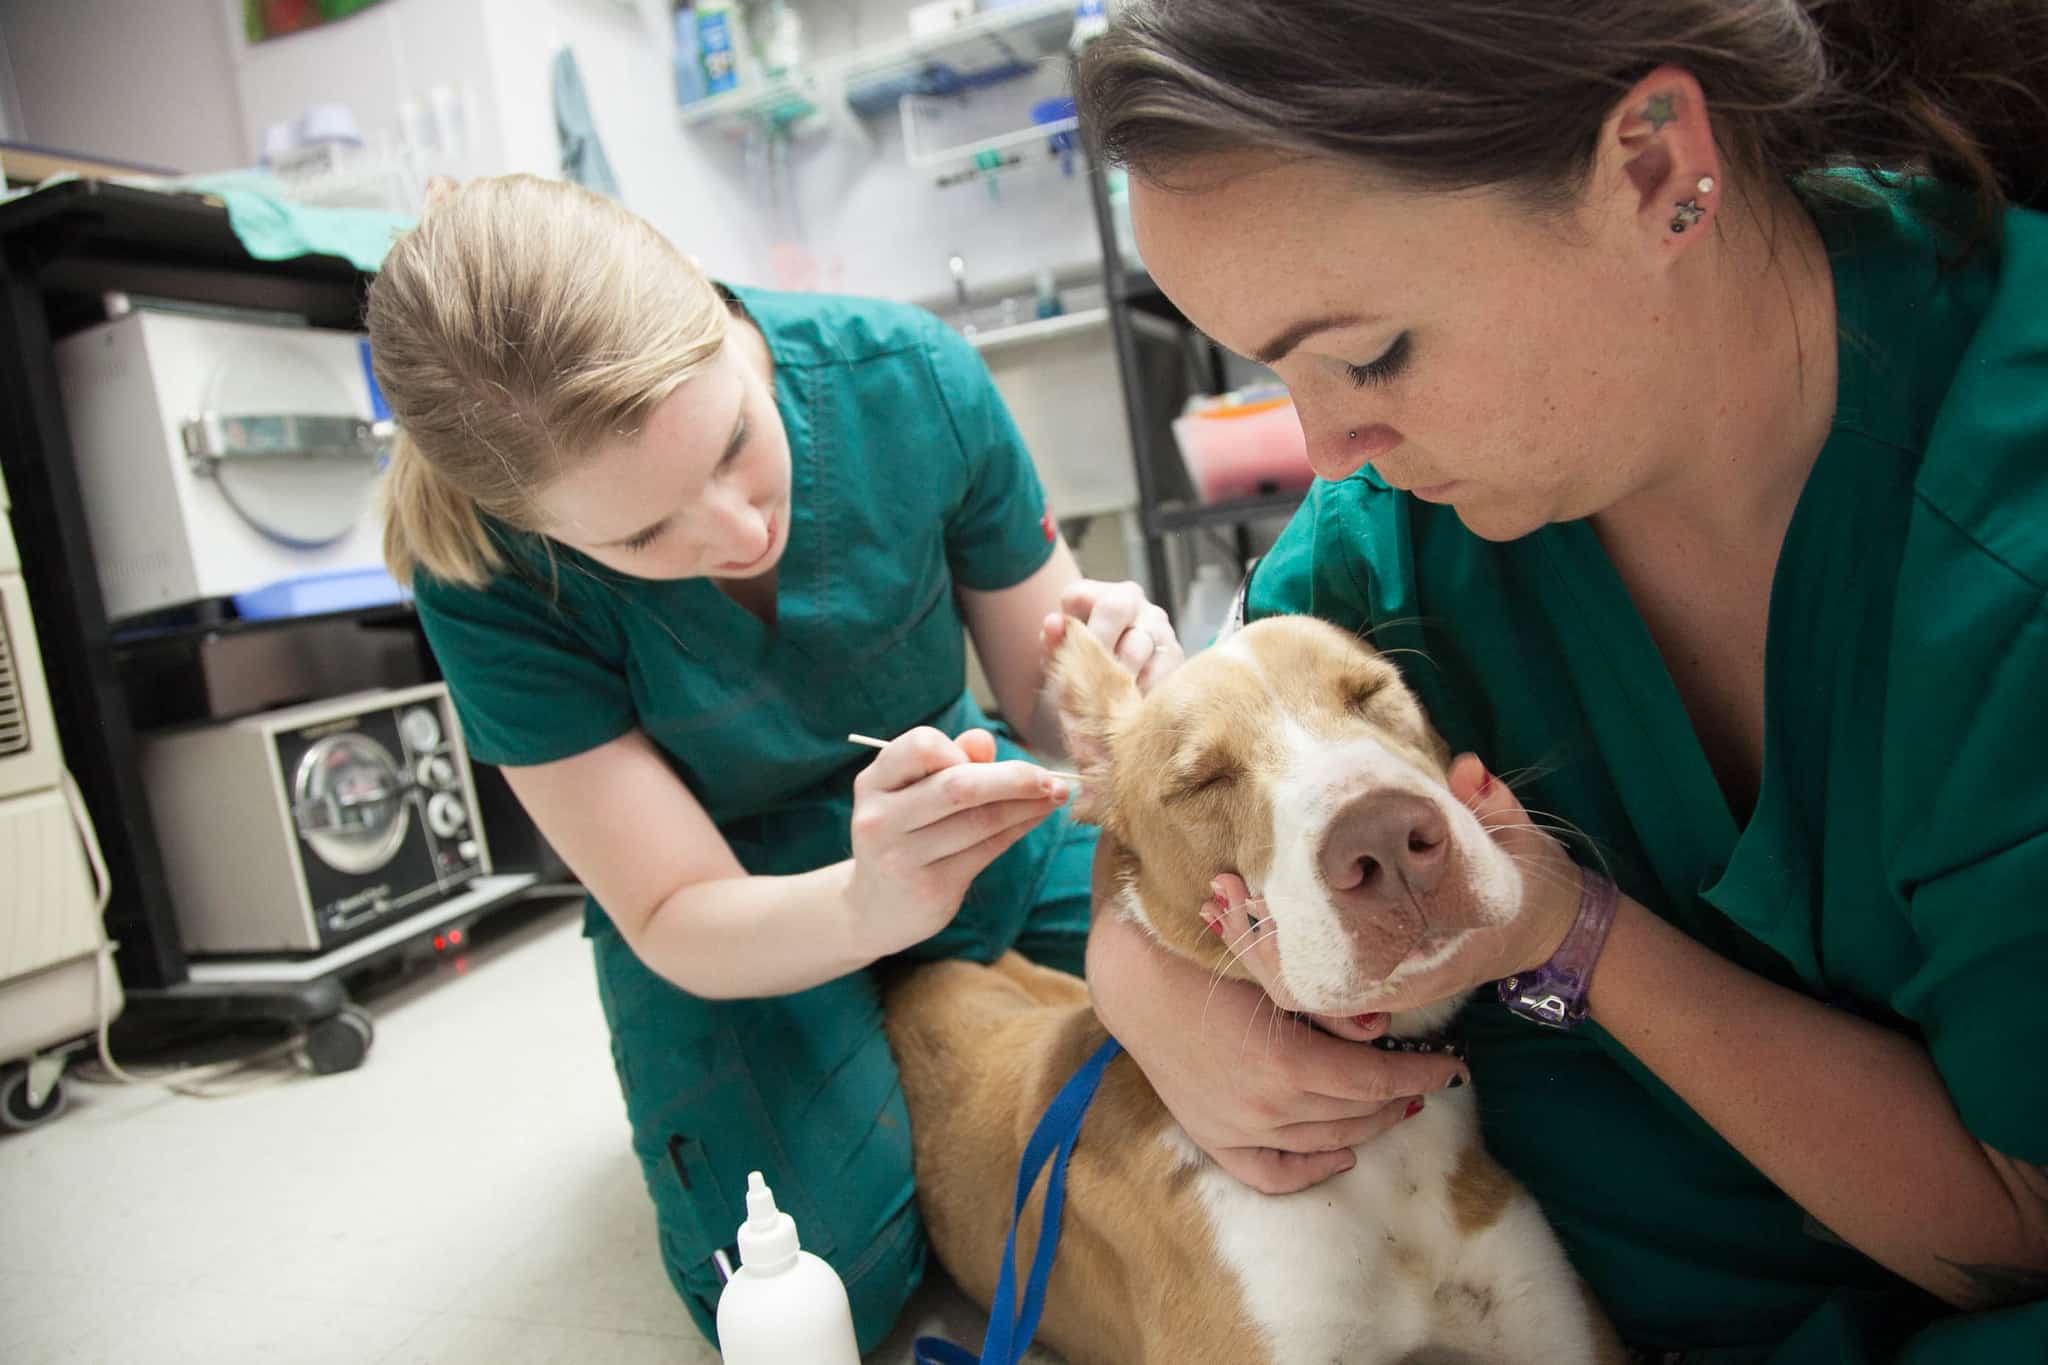 A dog getting an ear swab at a vet office